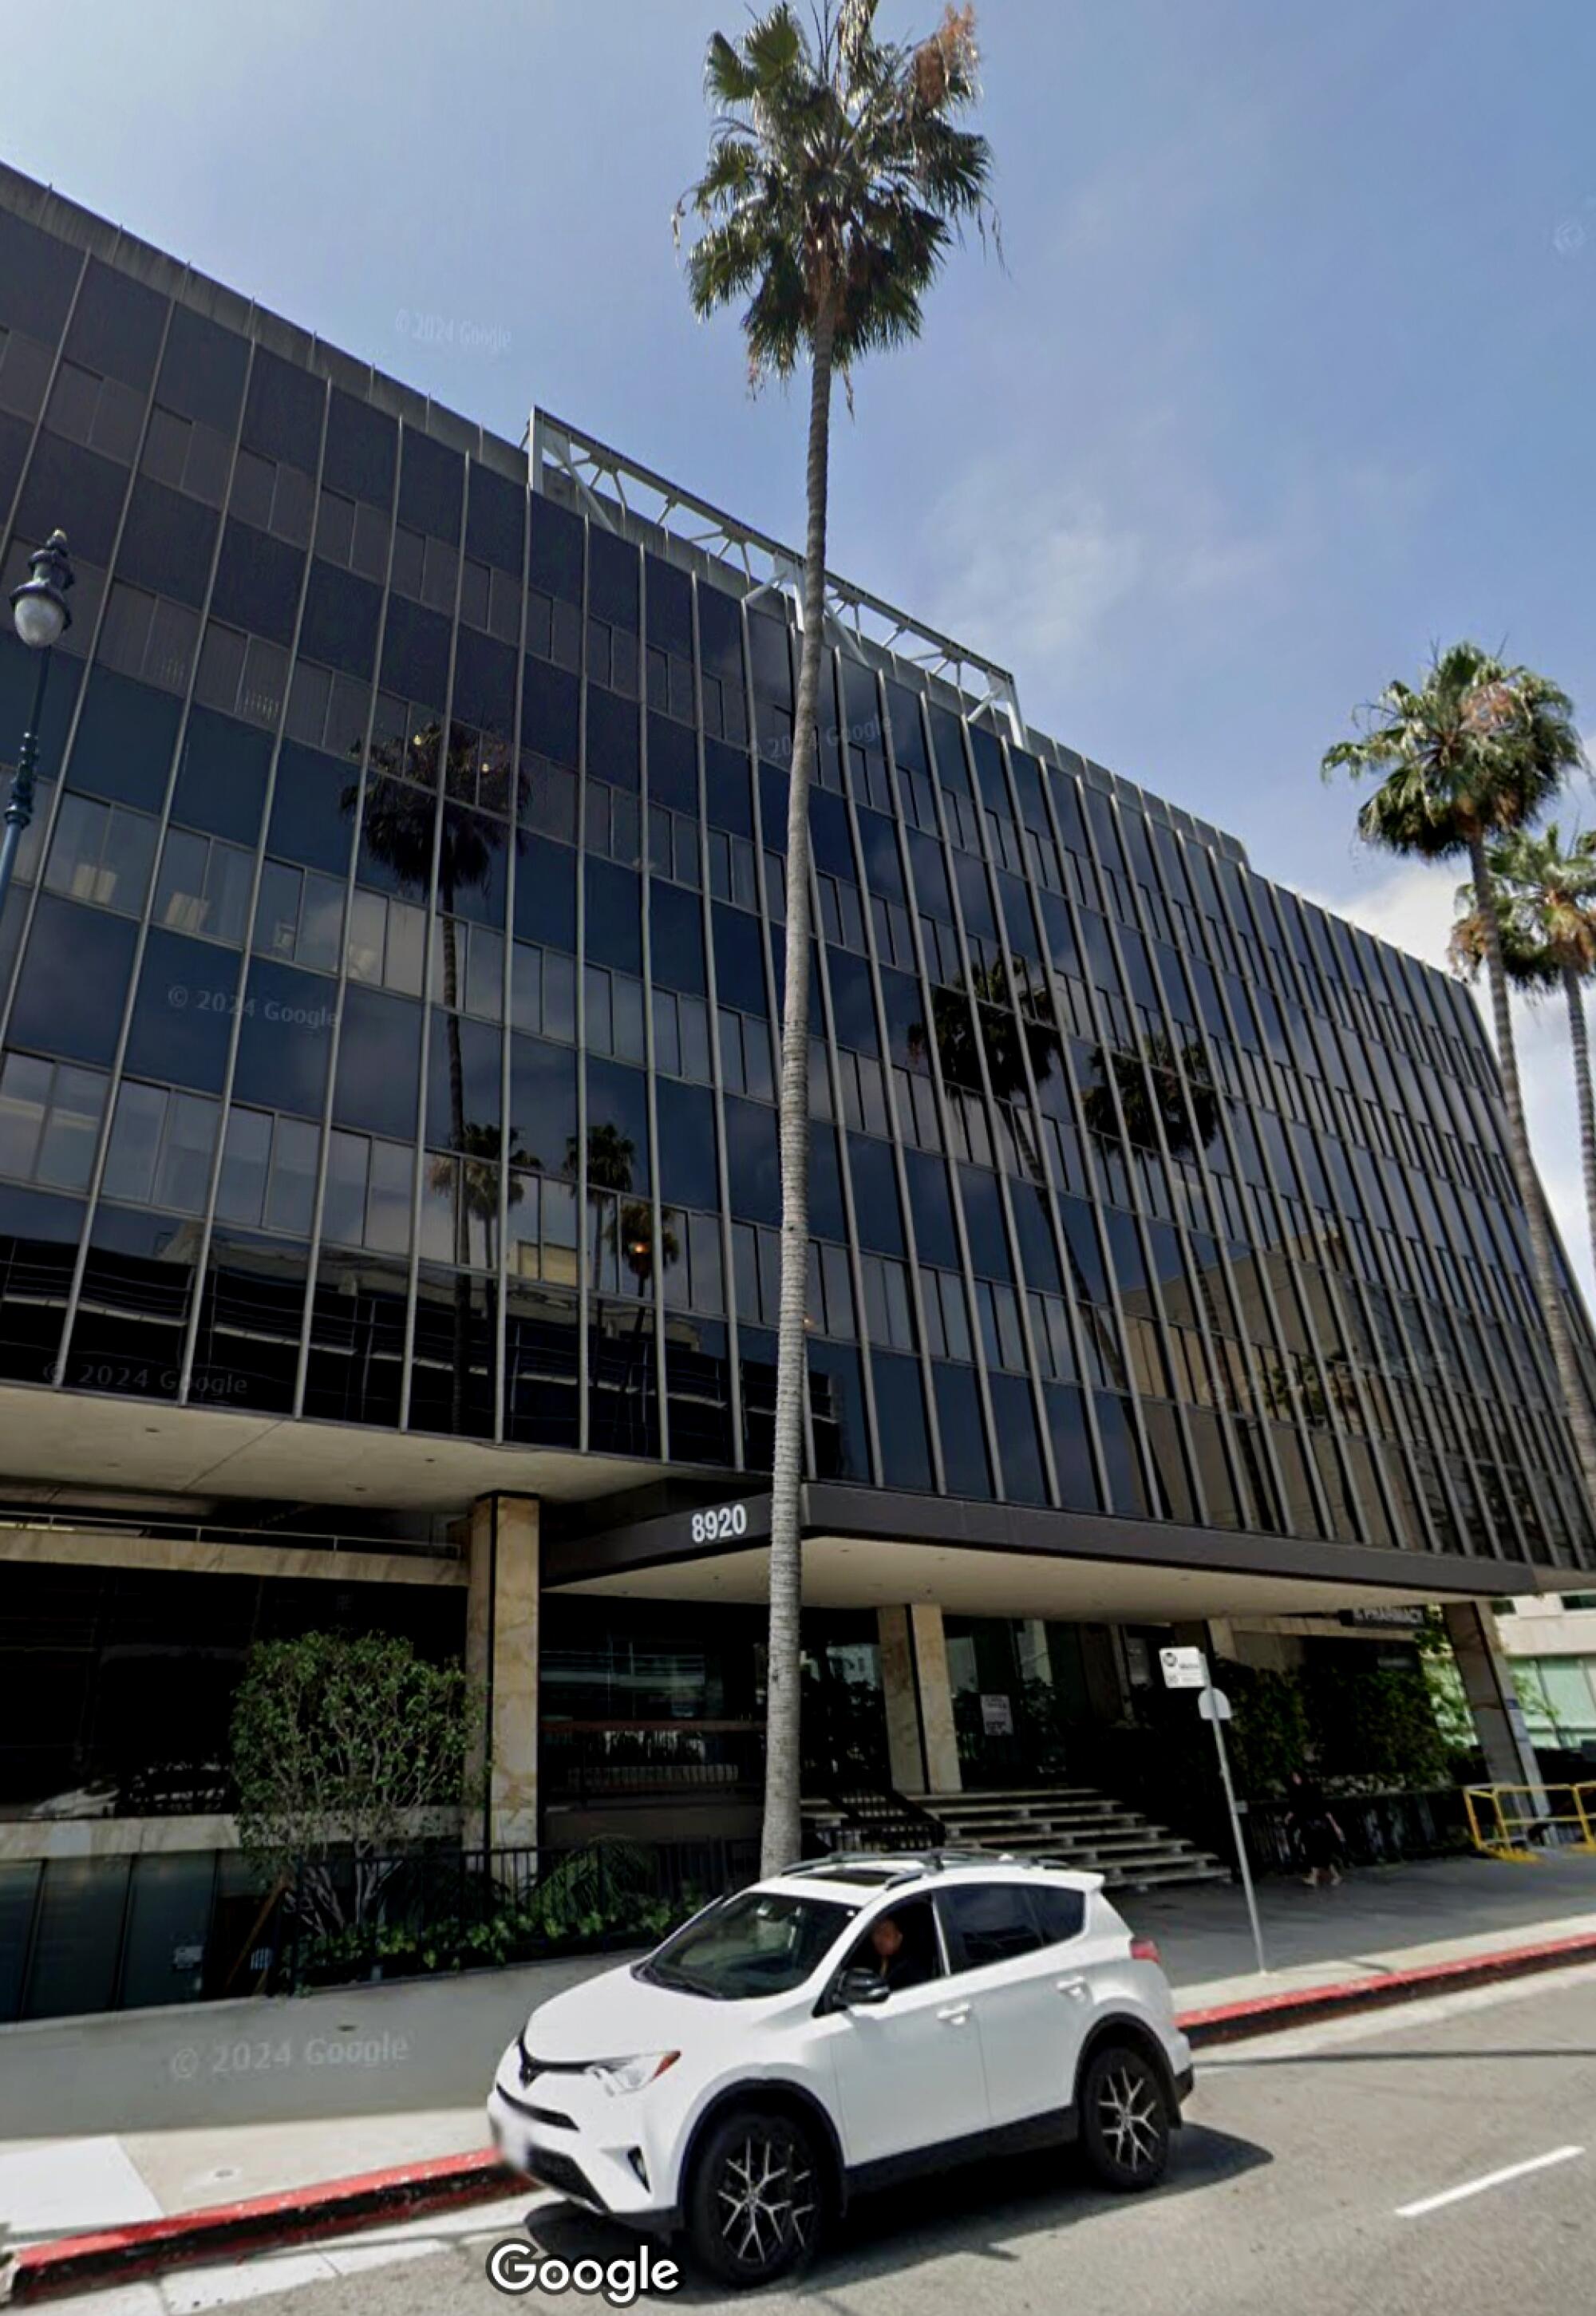 DuPont was set to open a clinic last fall at 8920 Wilshire Blvd. in Beverly Hills.